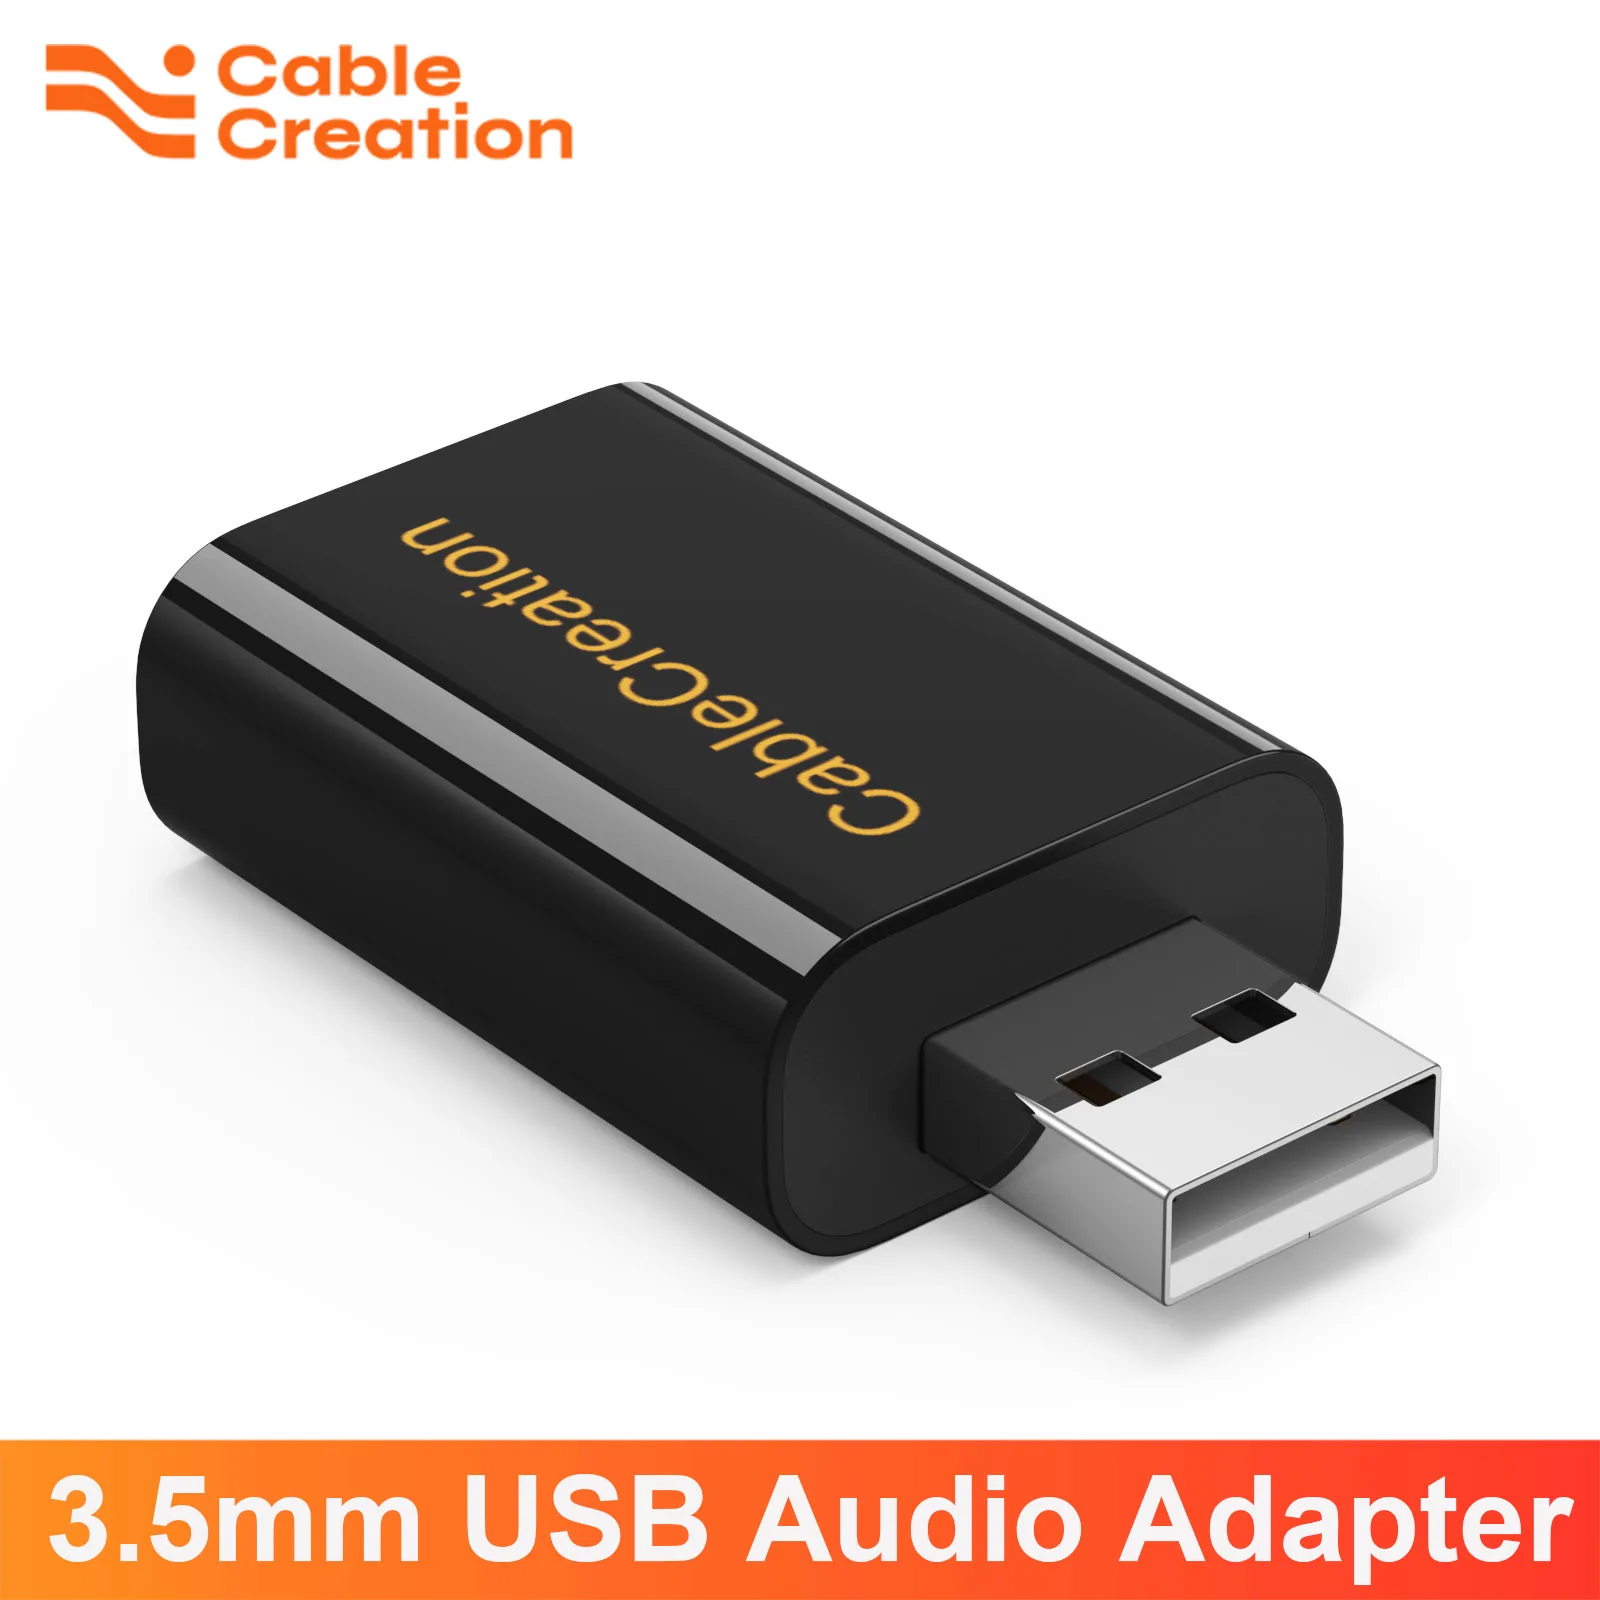 Sound Card 3-in-1 Jack USB Audio Adapter USB External Stereo Sound Card with 3.5mm Earphone and Microphone for PS3 PS4 Laptop